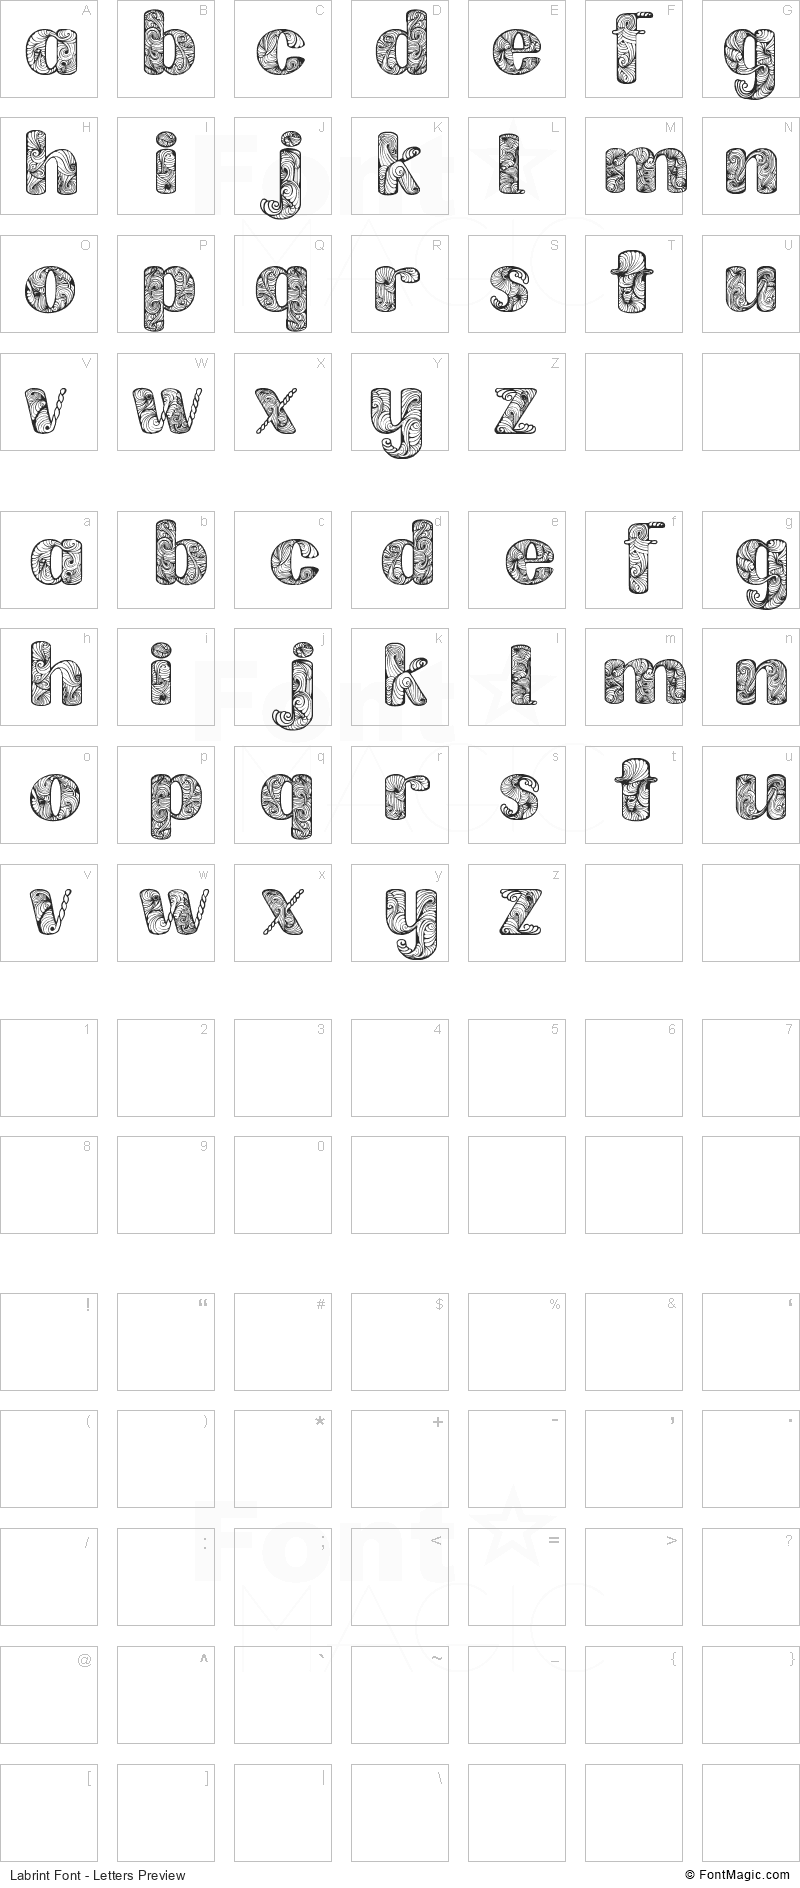 Labrint Font - All Latters Preview Chart